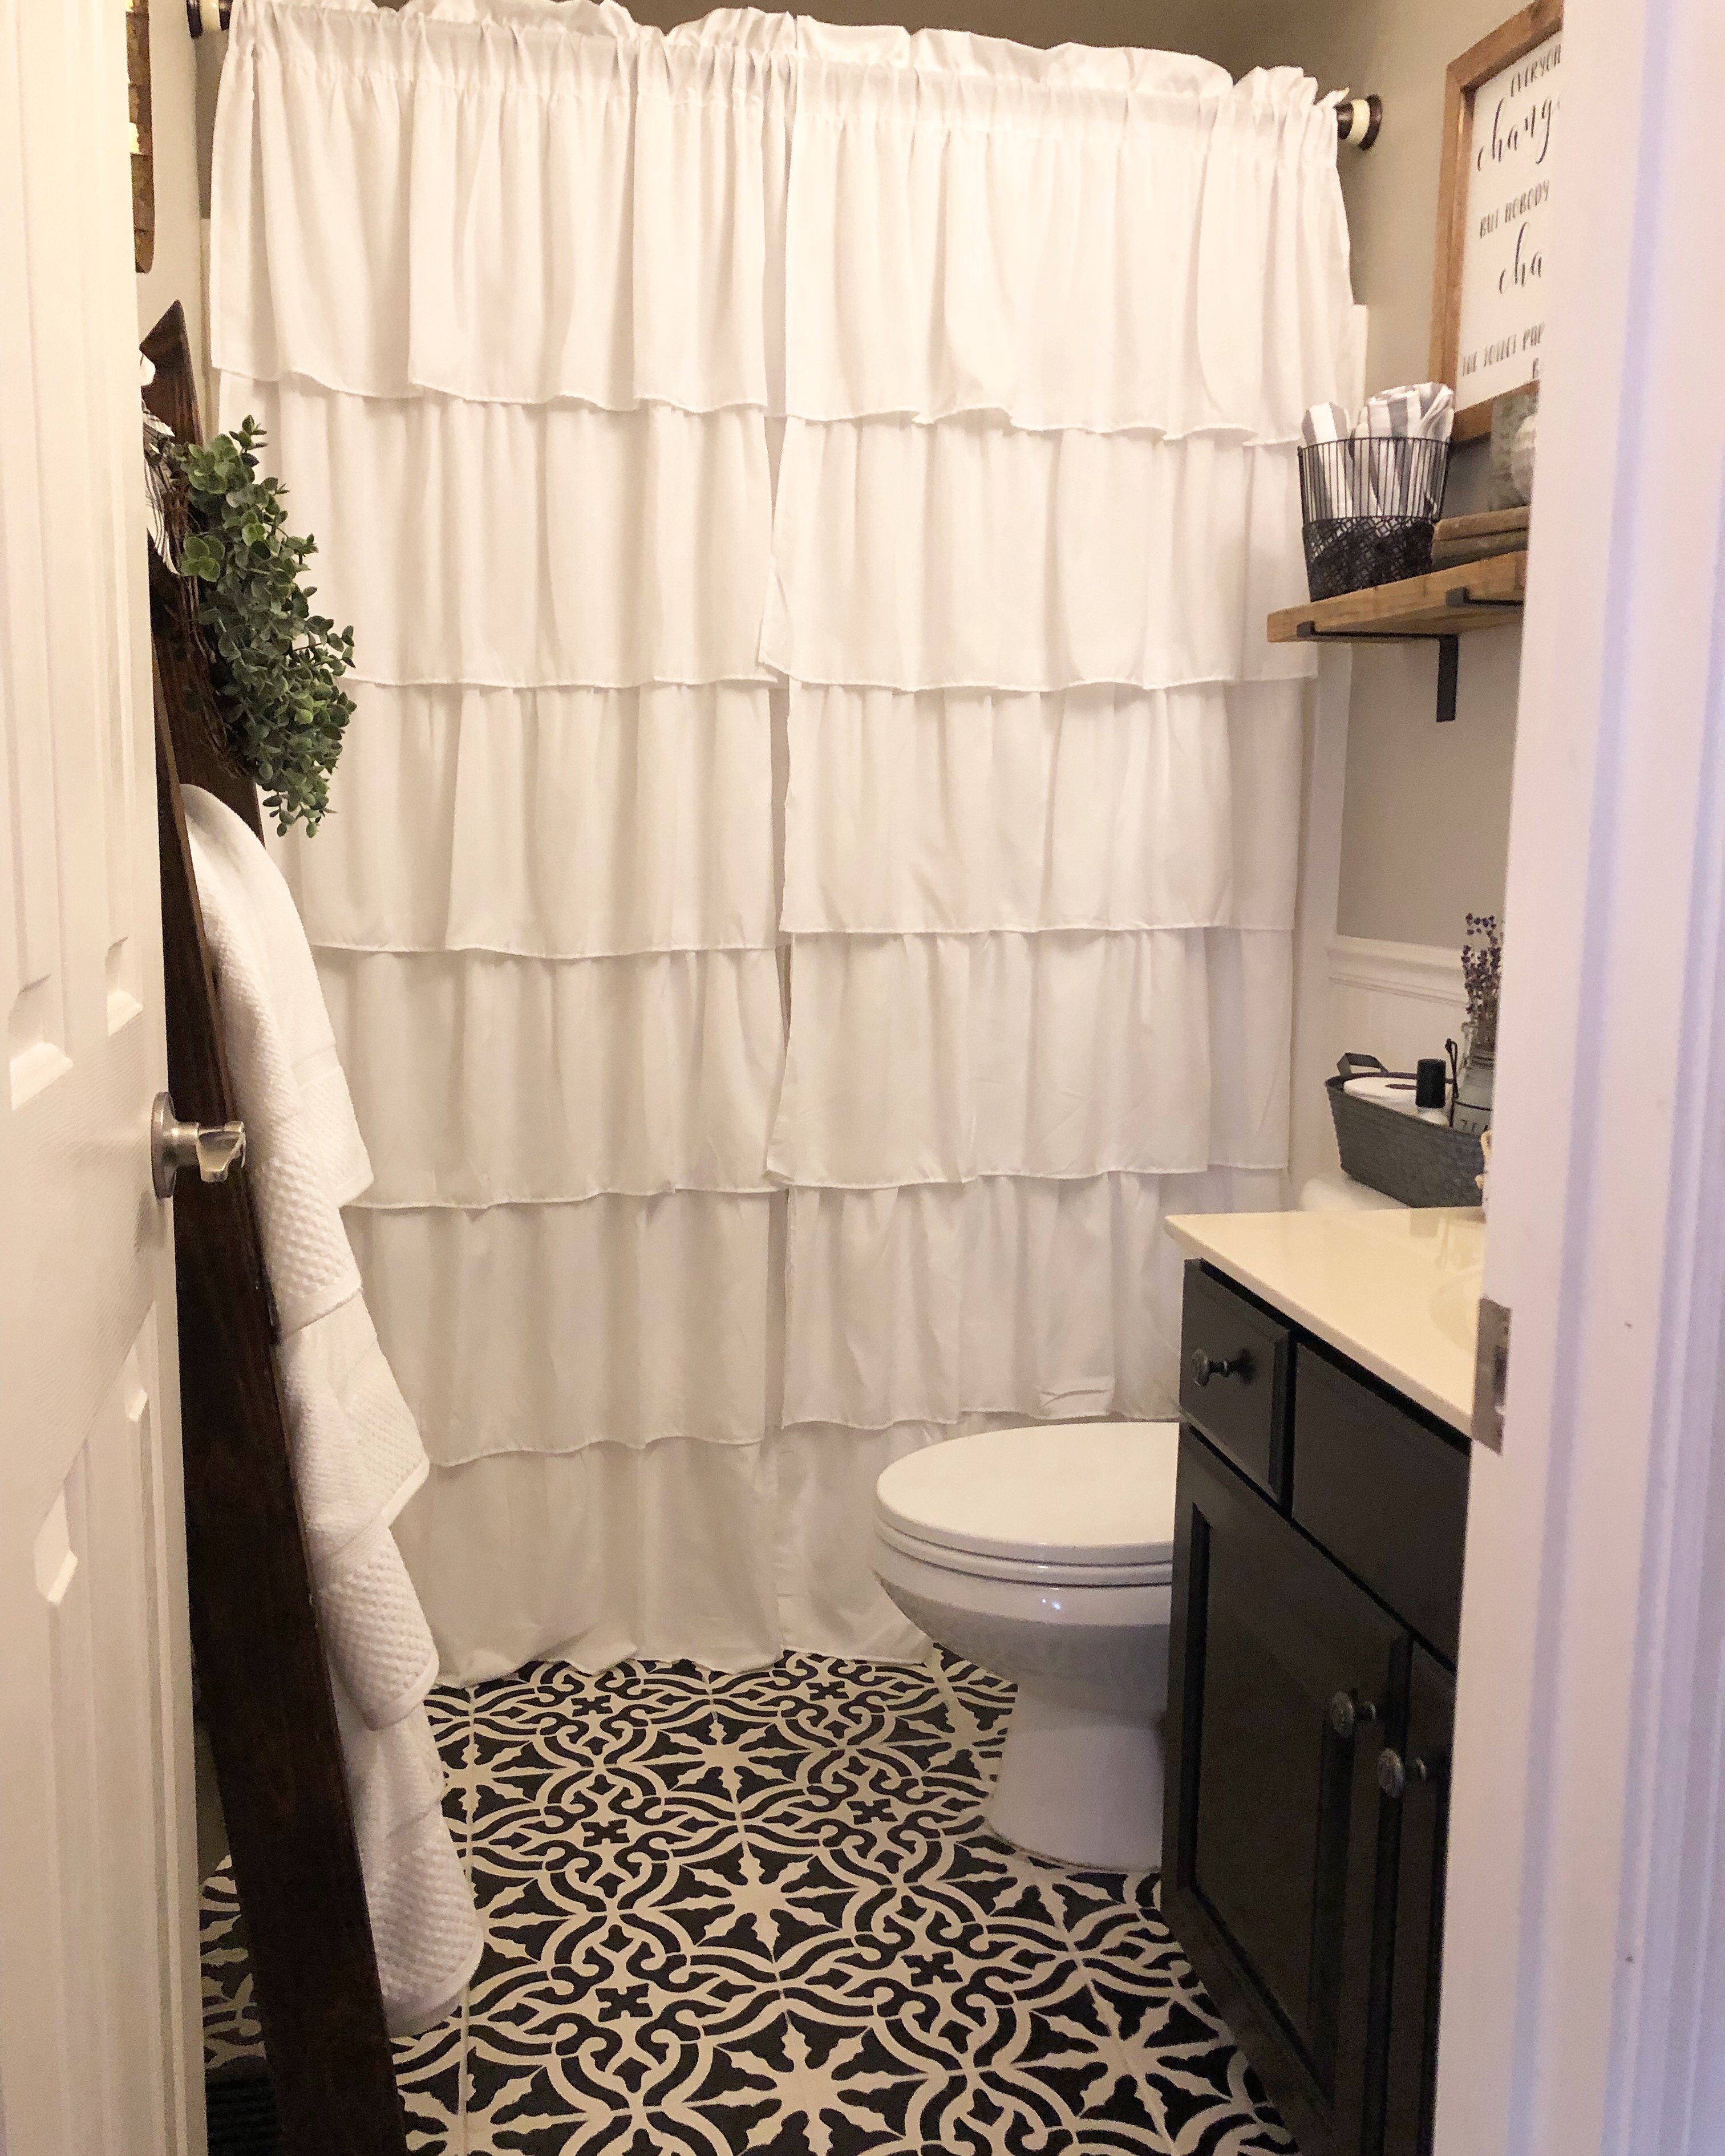 Budget Bathroom Makeover Reveal! The $100 Room Challenge is complete!